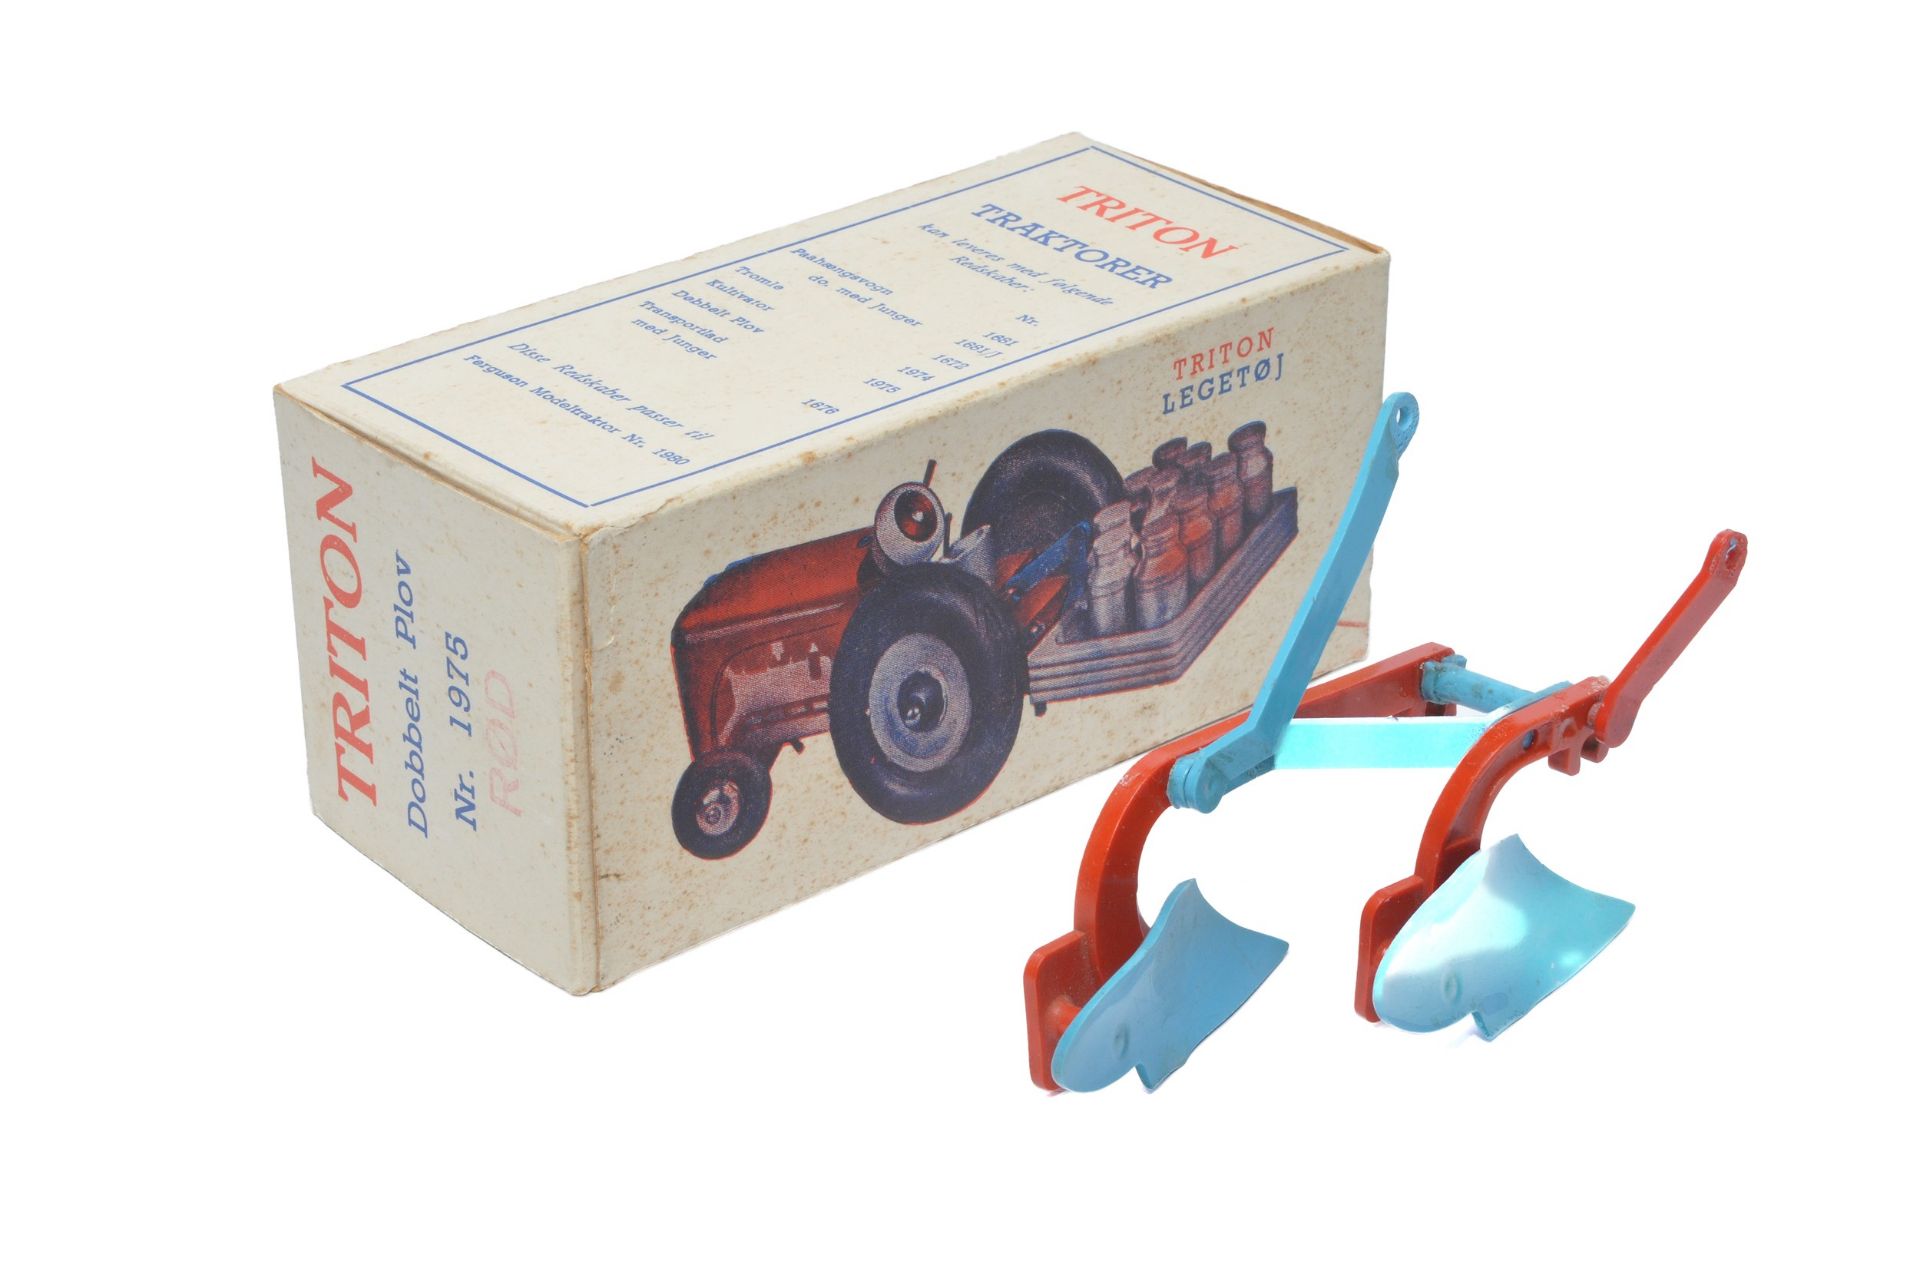 Triton (Denmark) No. 1975 plough for the Lego wooden Tractor. Note: Lego used the Triton factory - Image 2 of 2